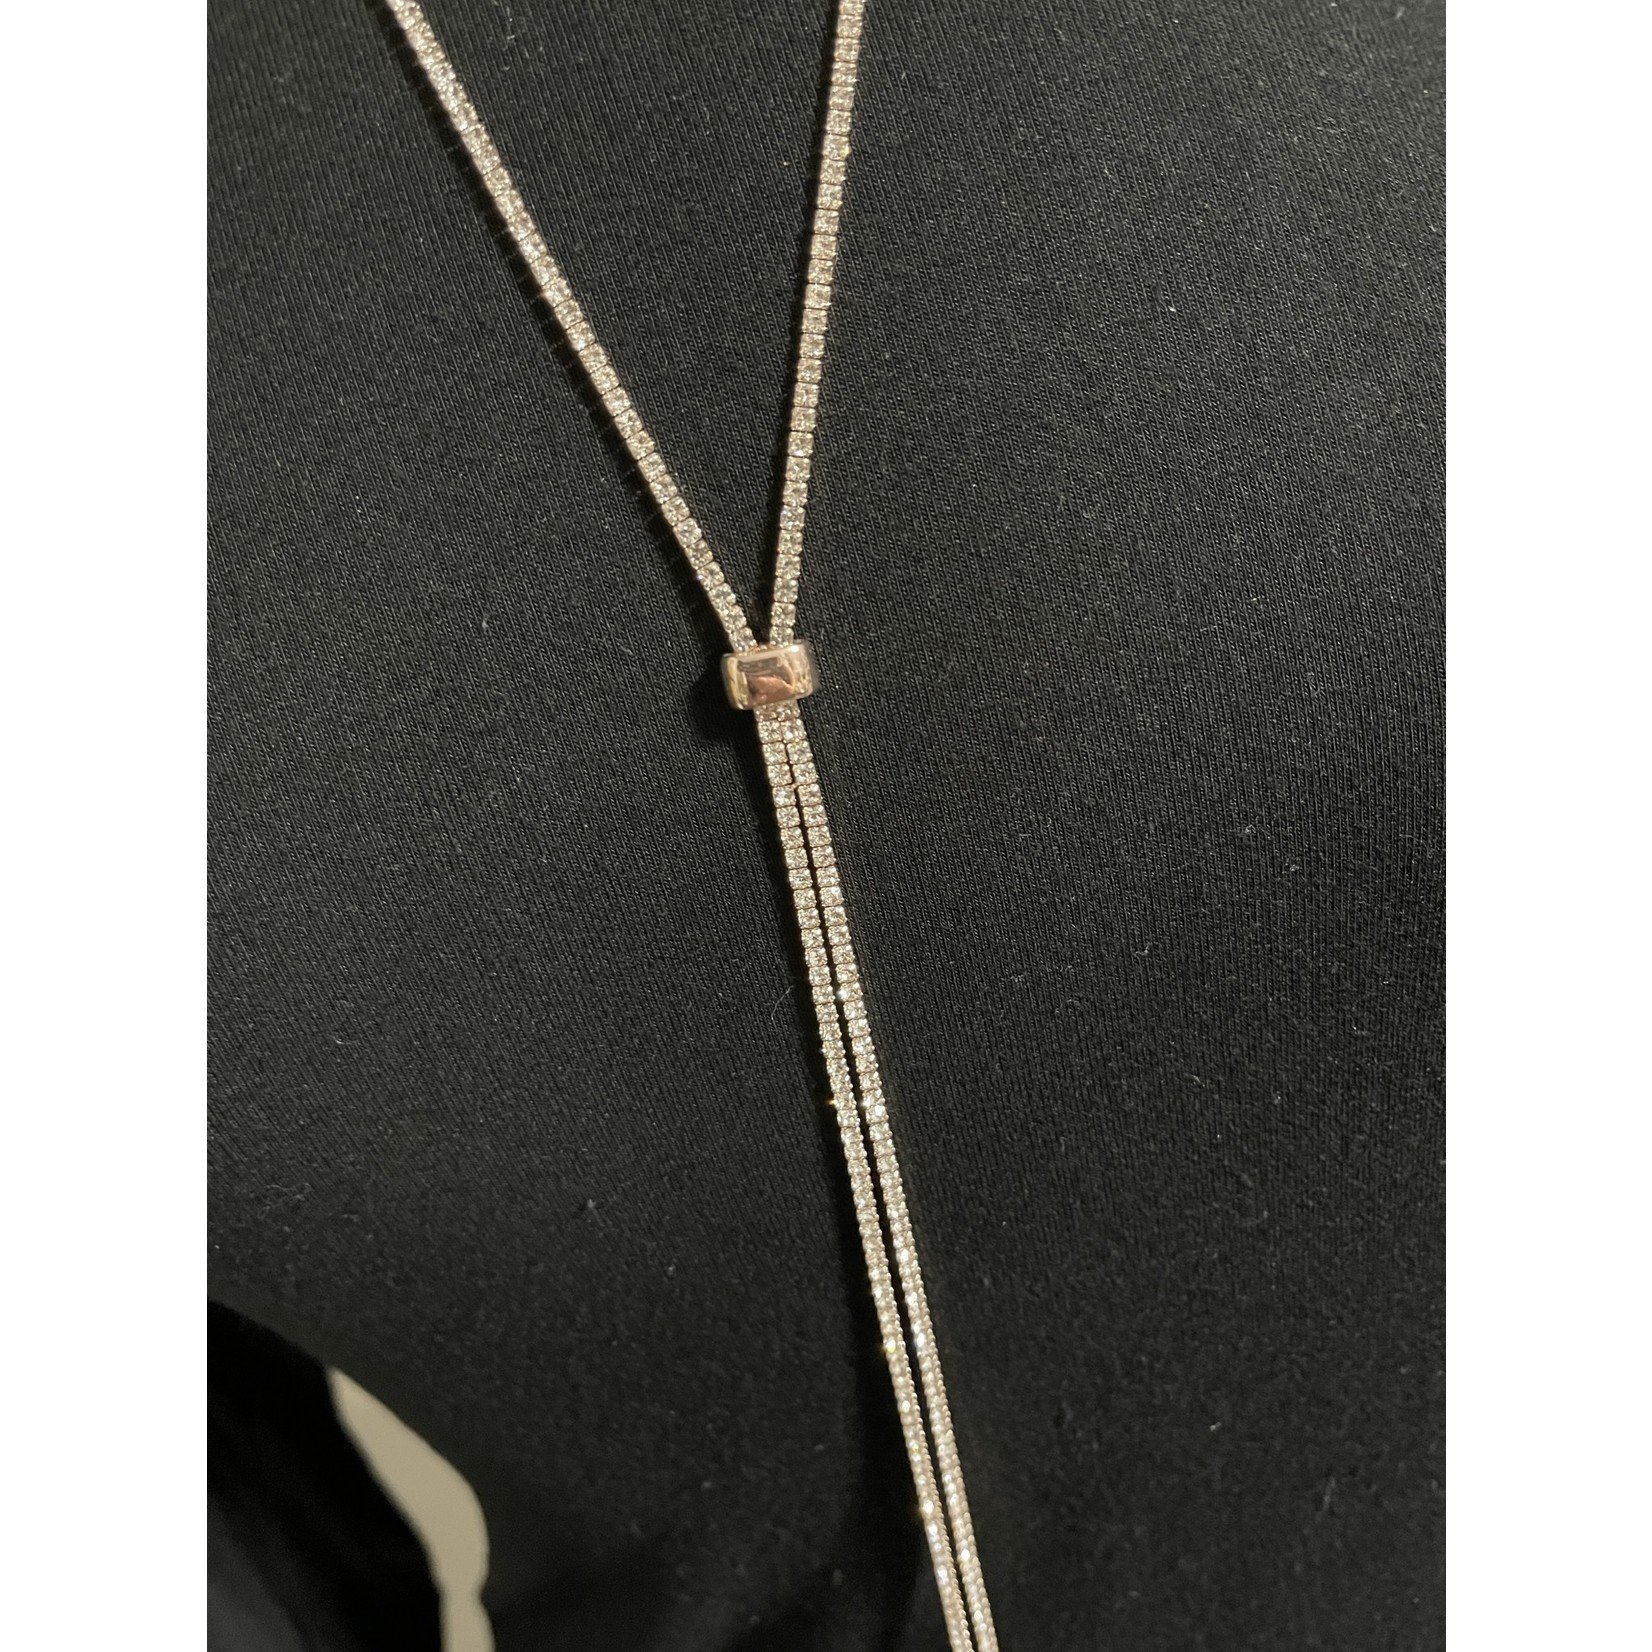 All That Glitterz Adorable Rose Gold Bling Adjustable Necklace